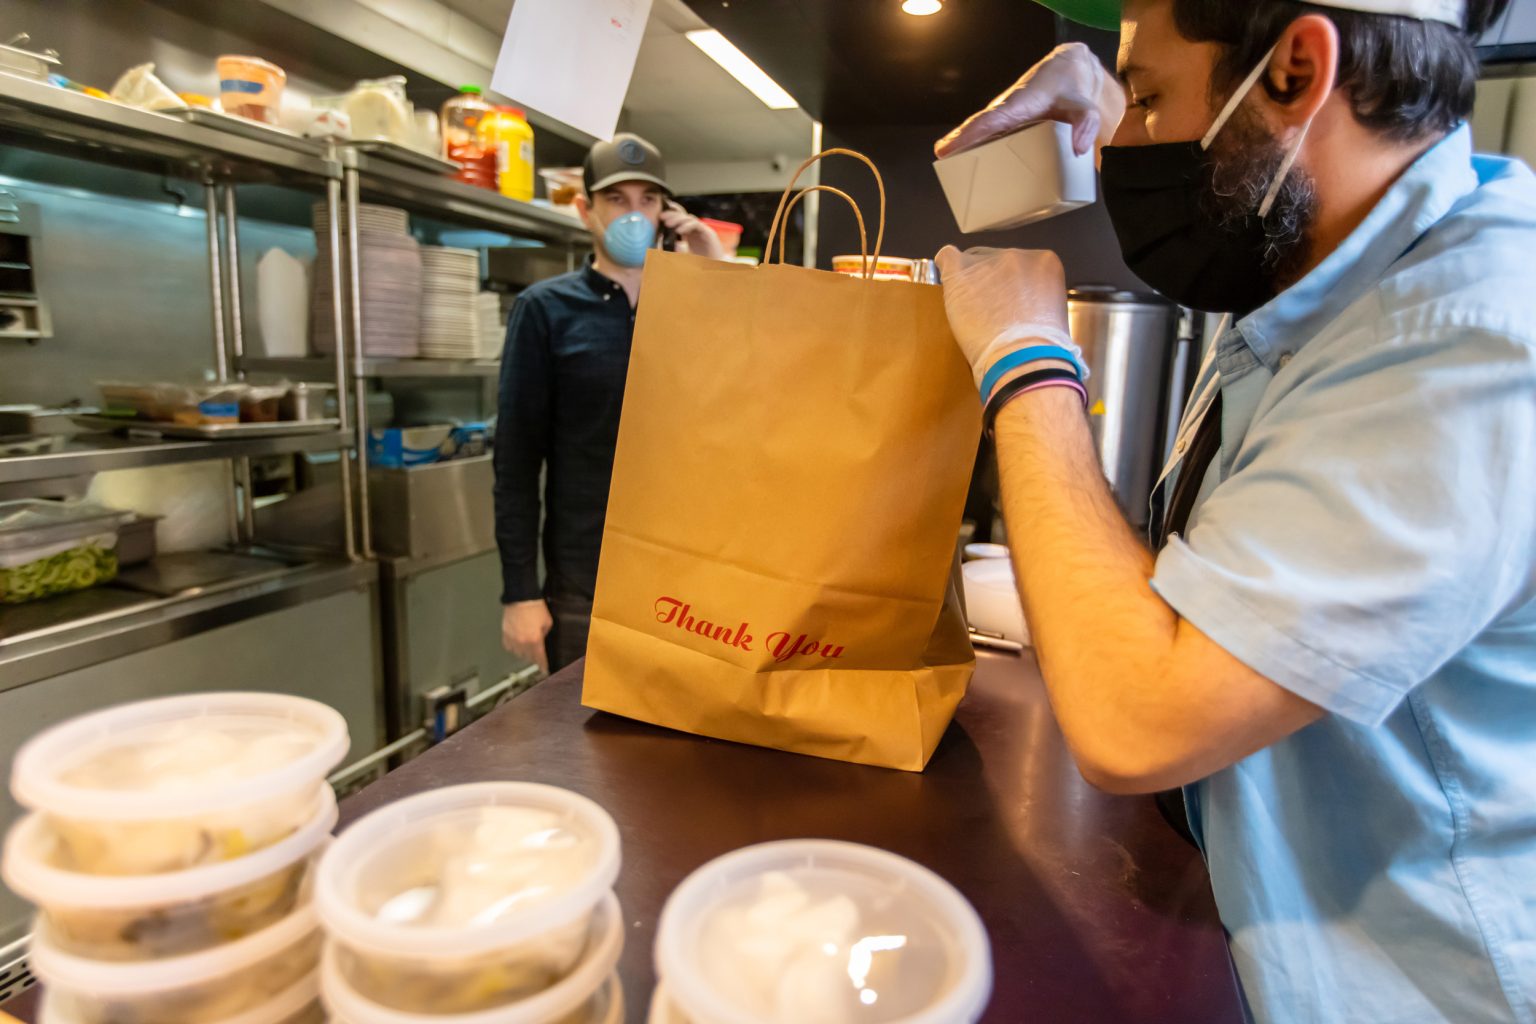 Two male food service workers in a restaurant kitchen both wearing masks. The one worker is filling up a paper bag with food.